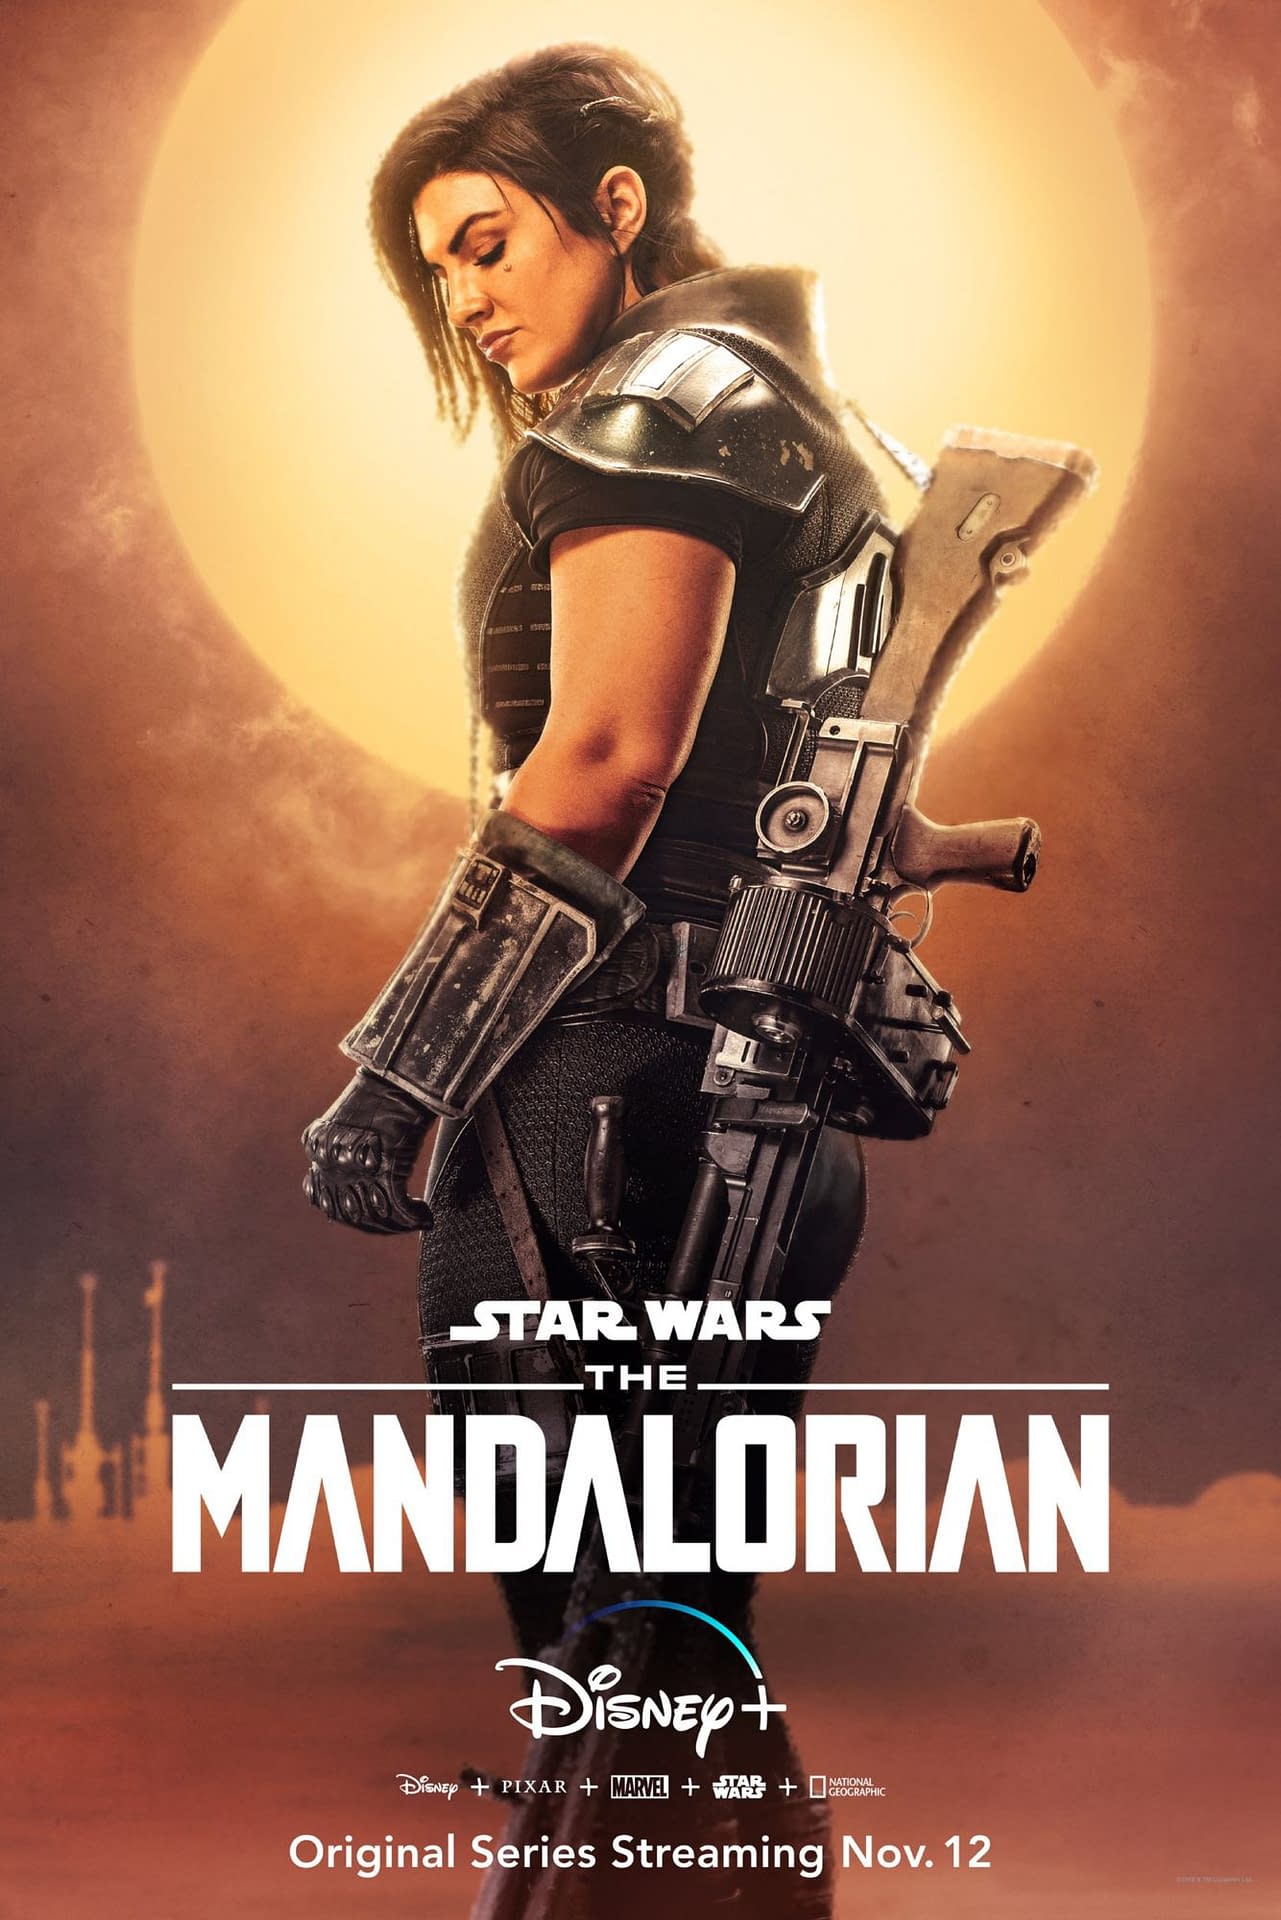 "The Mandalorian" Releases First-Look Image, Teaser of Ming-Na Wen's Fennec Shand [VIDEO]